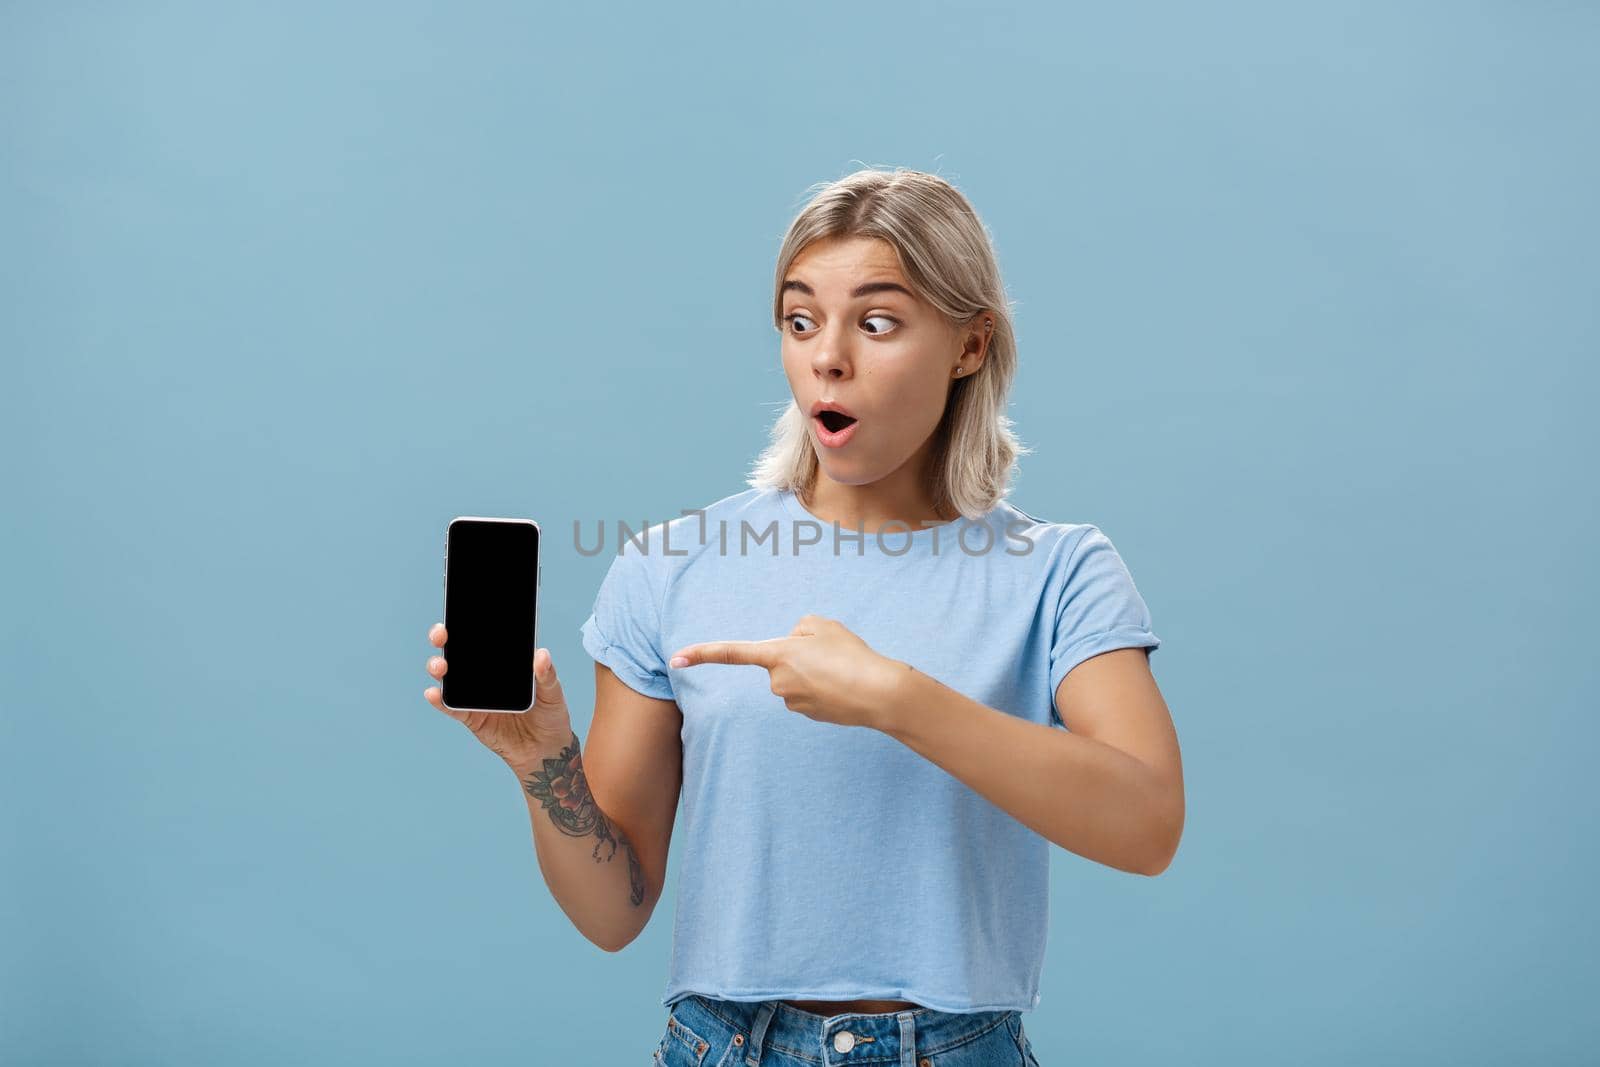 Girl being amazed with cool new smartphone received on birthday. Surprised speechless happy woman with fair hair and tattoo dropping jaw holding smartphone pointing and staring at gadget screen.